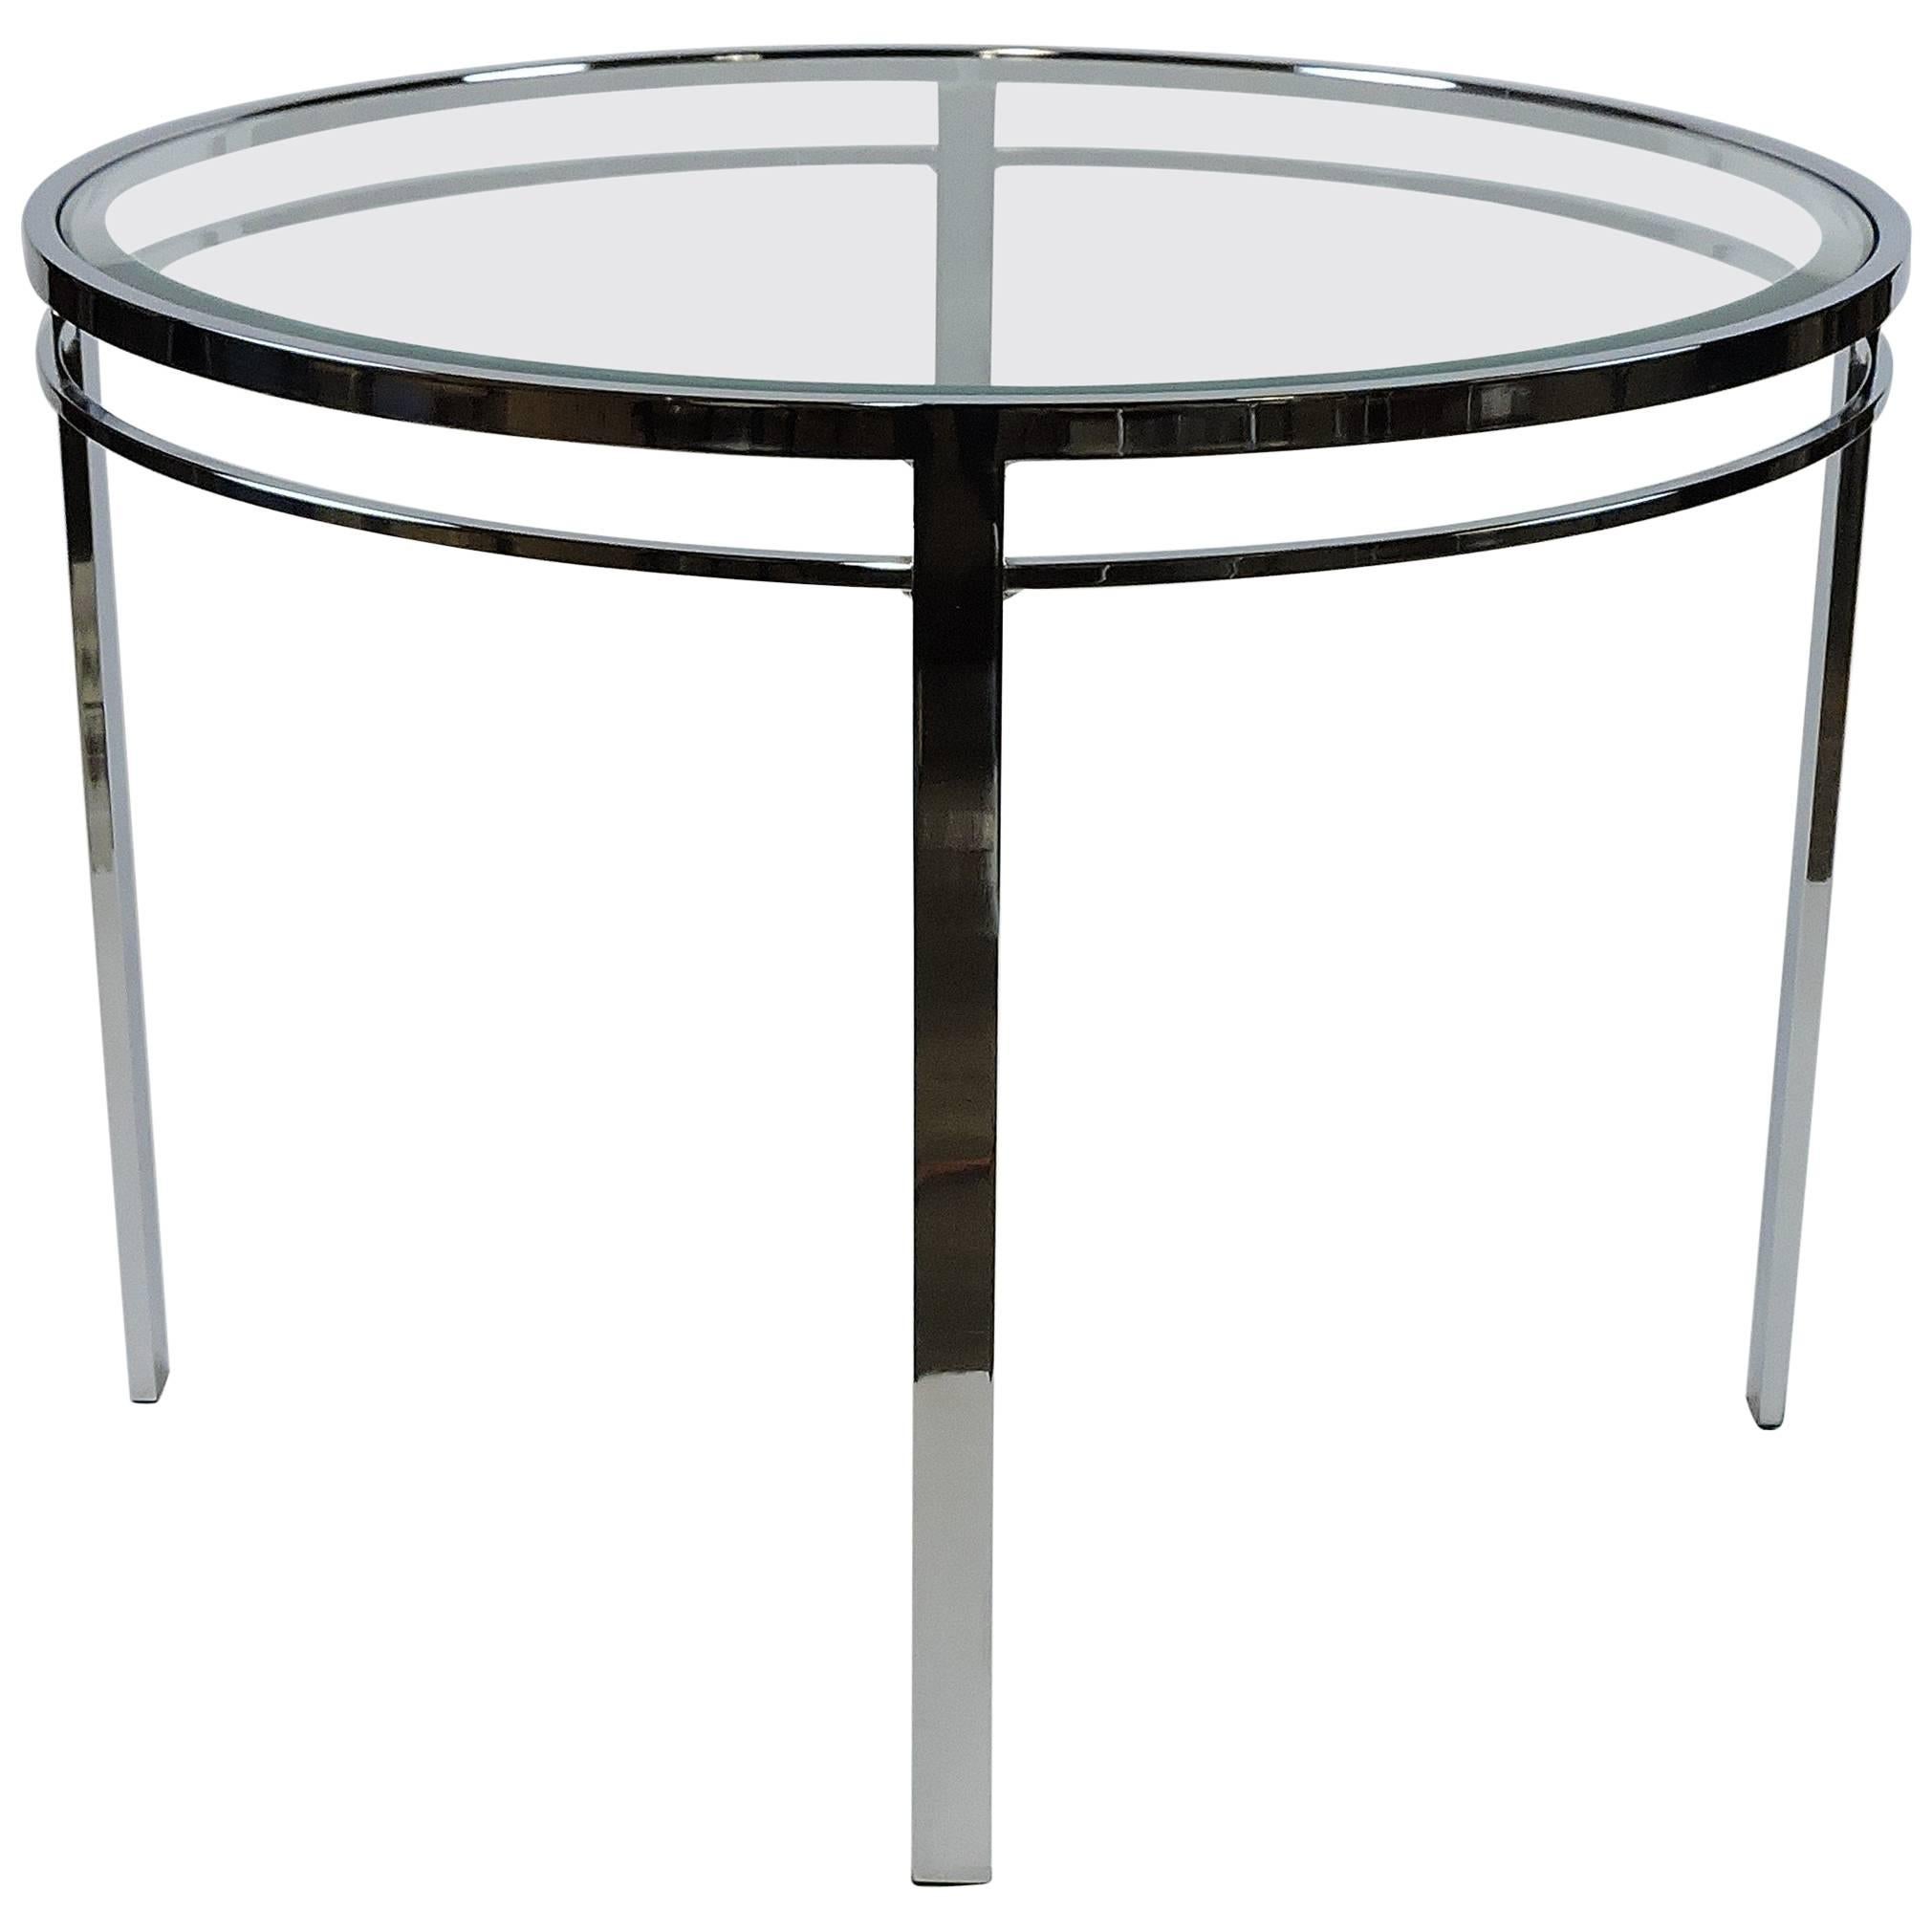 Chrome and Glass Mid-Century Modern Round Dining Table